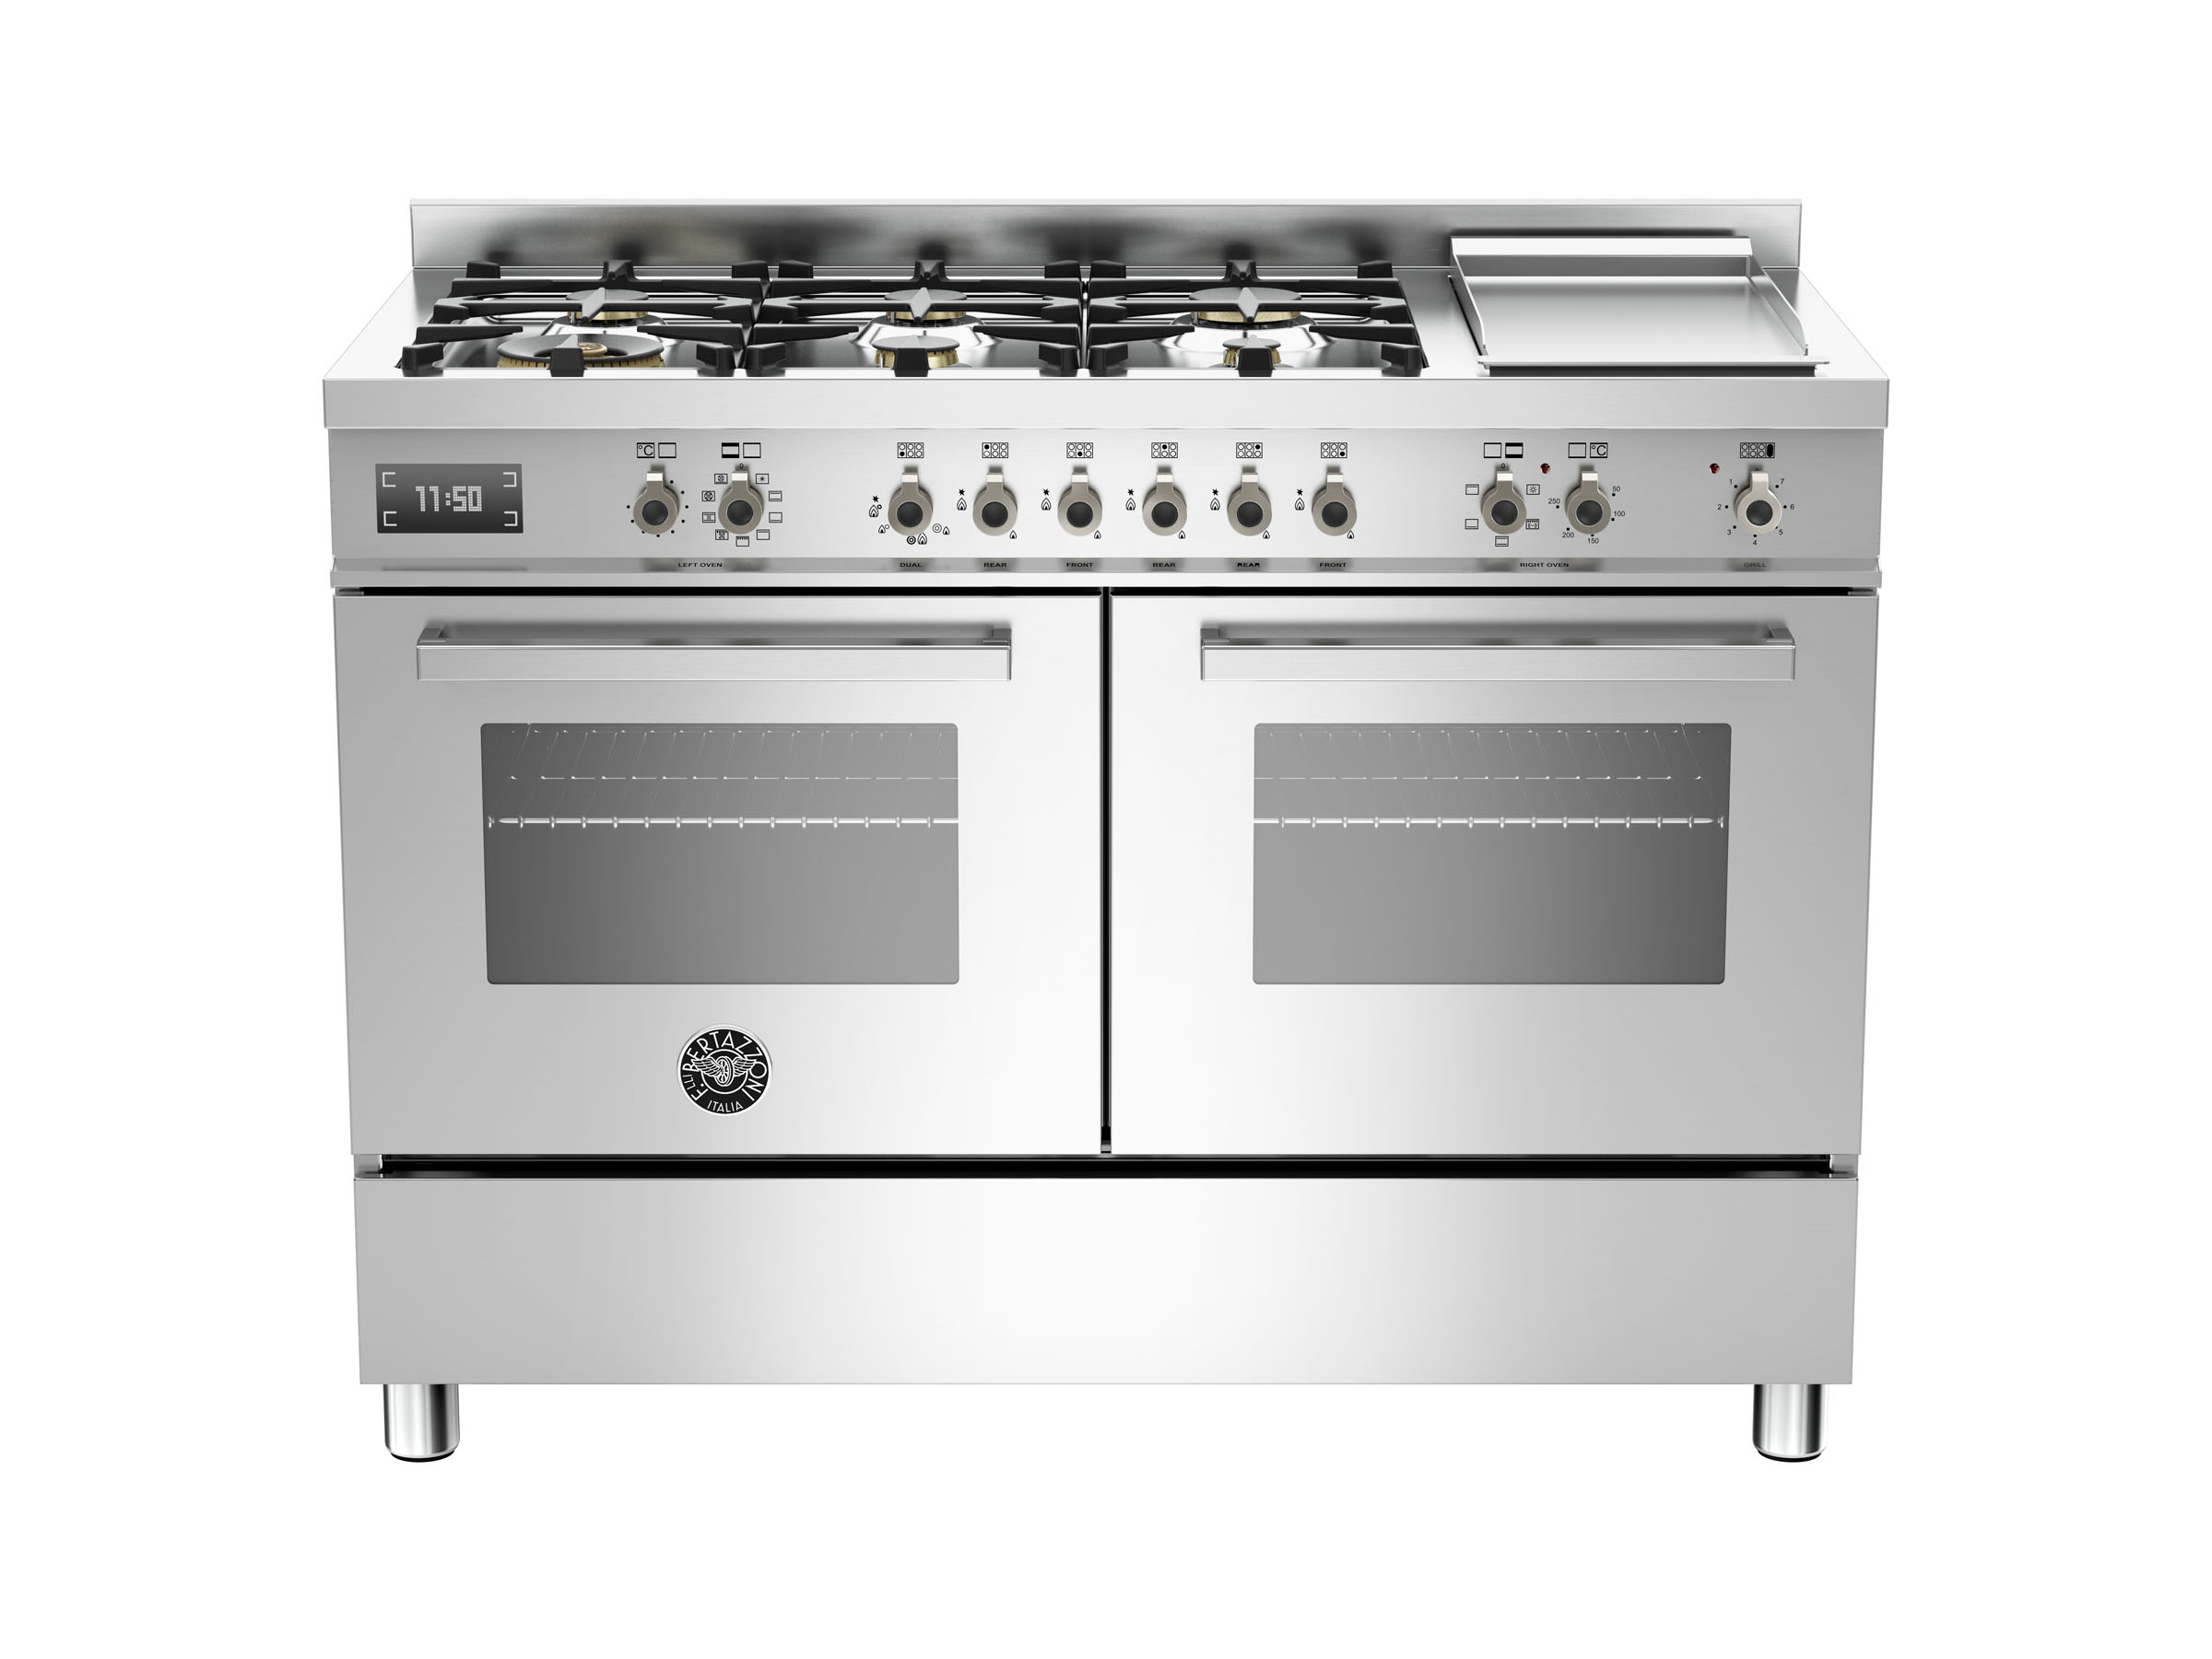 120 cm 6-burner + griddle, Electric Double Oven | Bertazzoni - Stainless